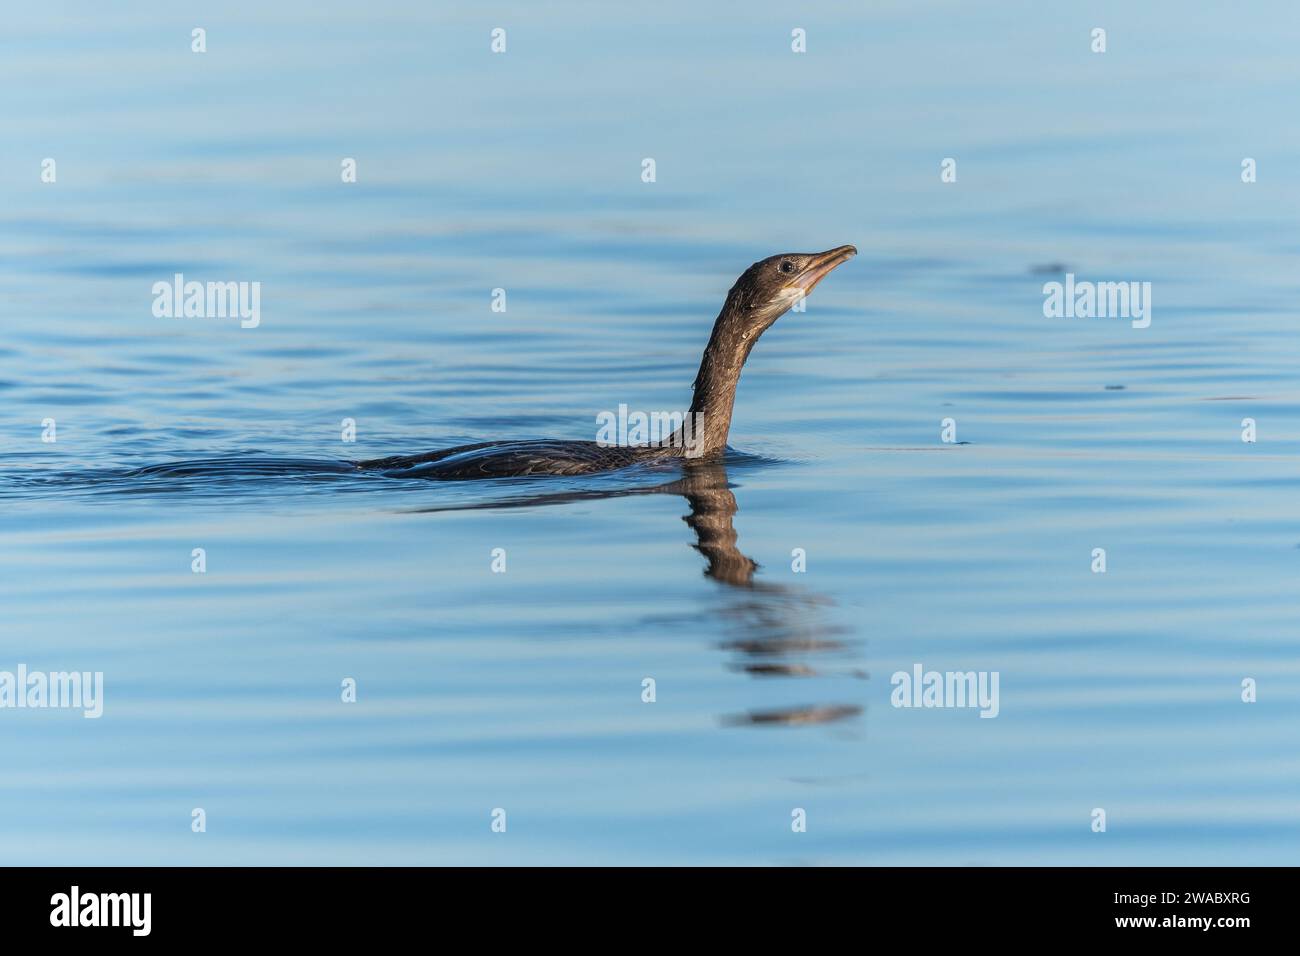 Pygmy cormorant (Microcarbo pygmaeus) swimming in the water in search of food. Bas-Rhin, Alsace,Grand Est, France, Europe. Stock Photo